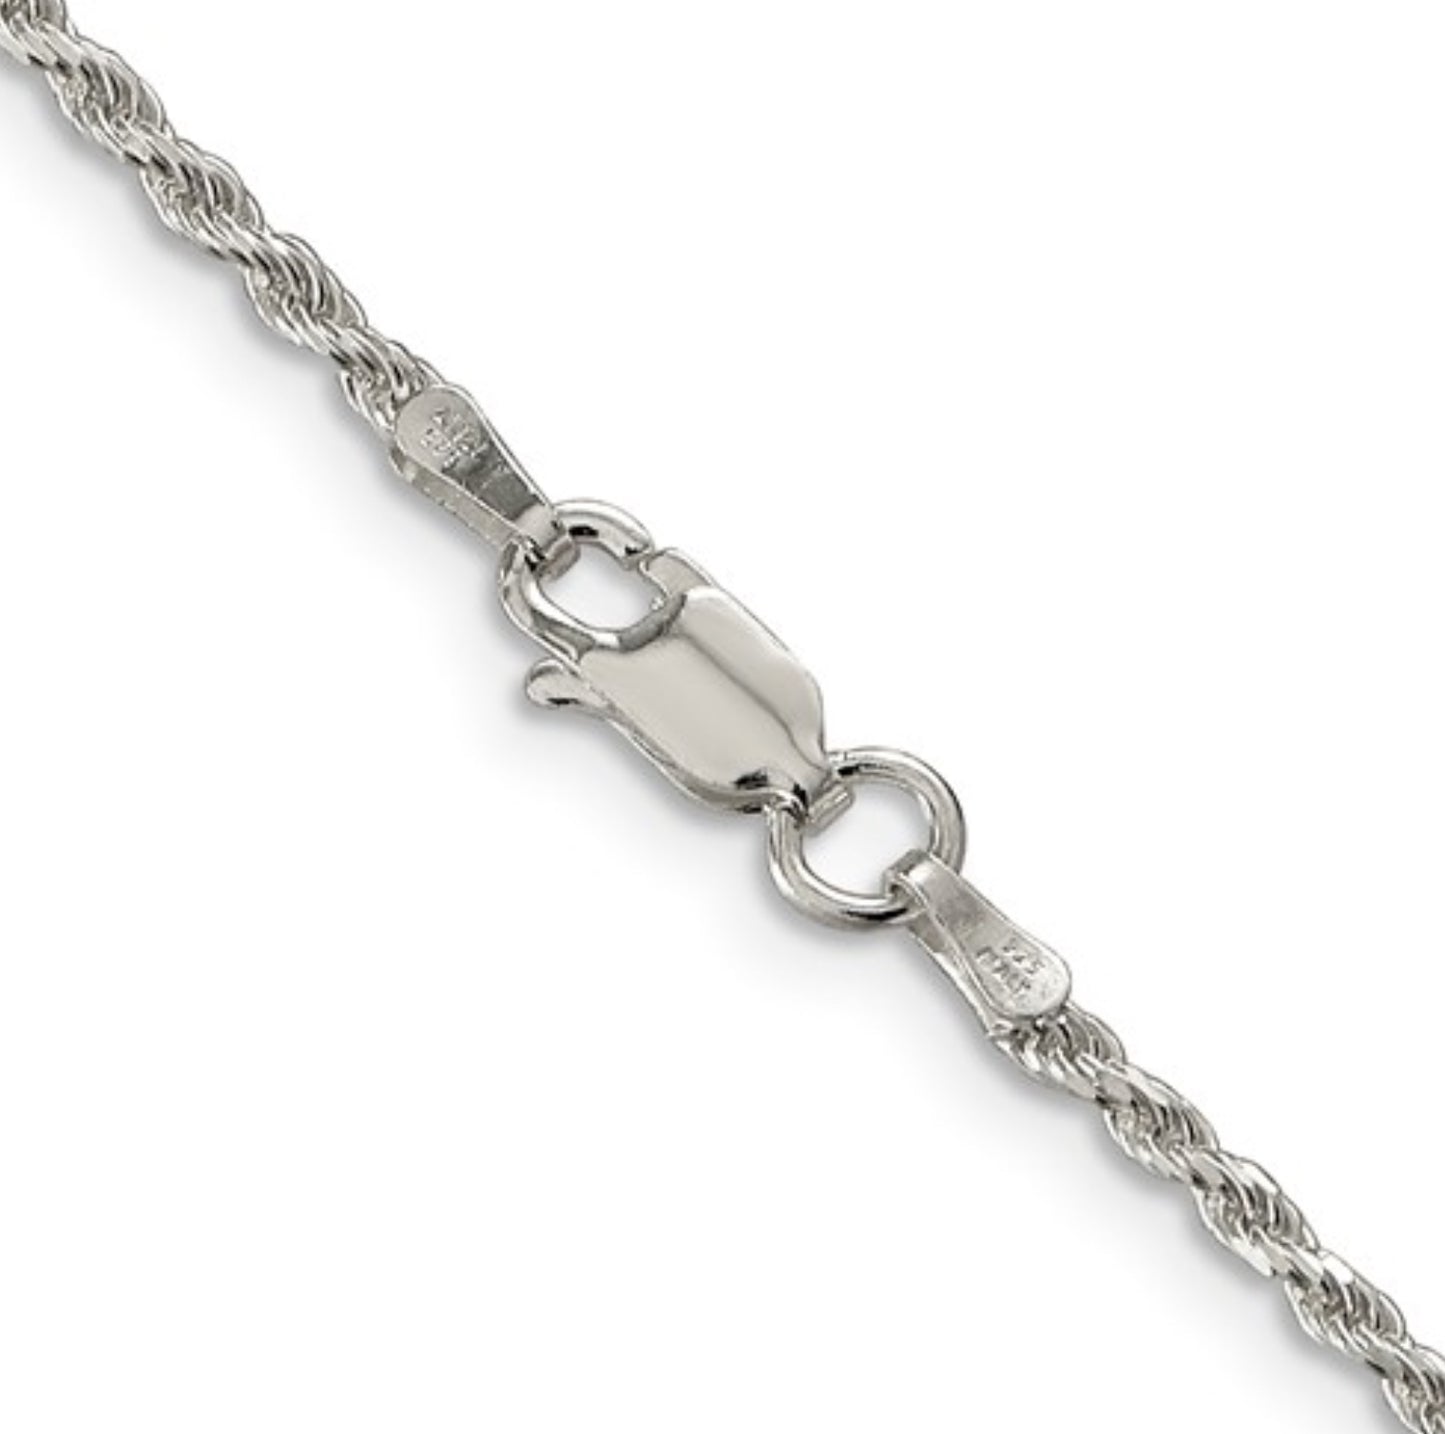 Sterling Silver 1.85mm Diamond-Cut Rope Chain